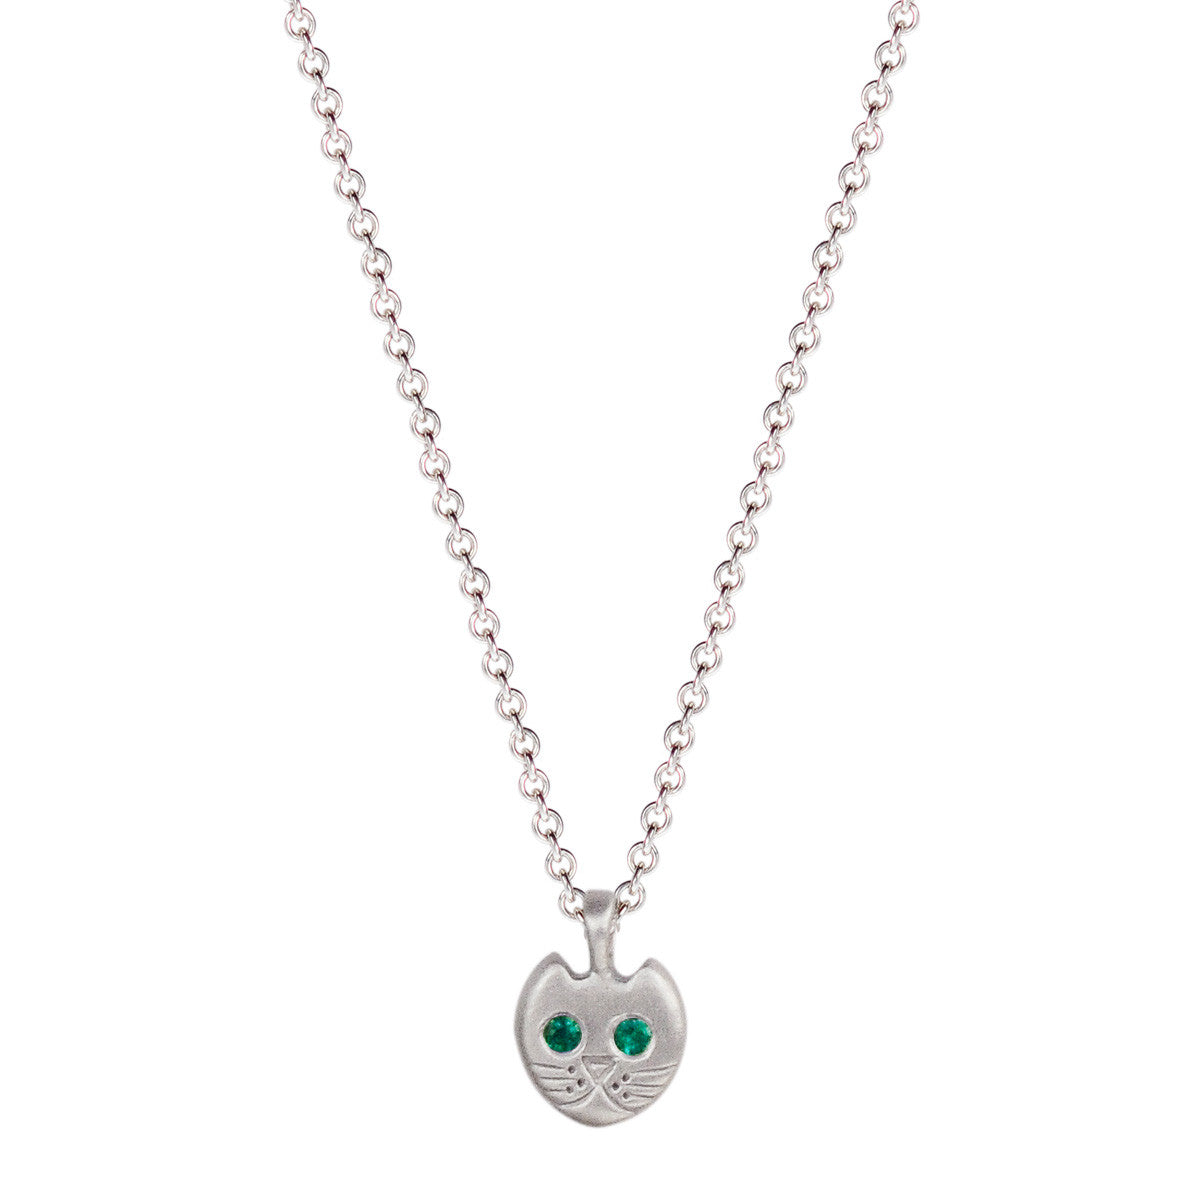 Sterling Silver Tiny Kitten Pendant with Emerald Eyes